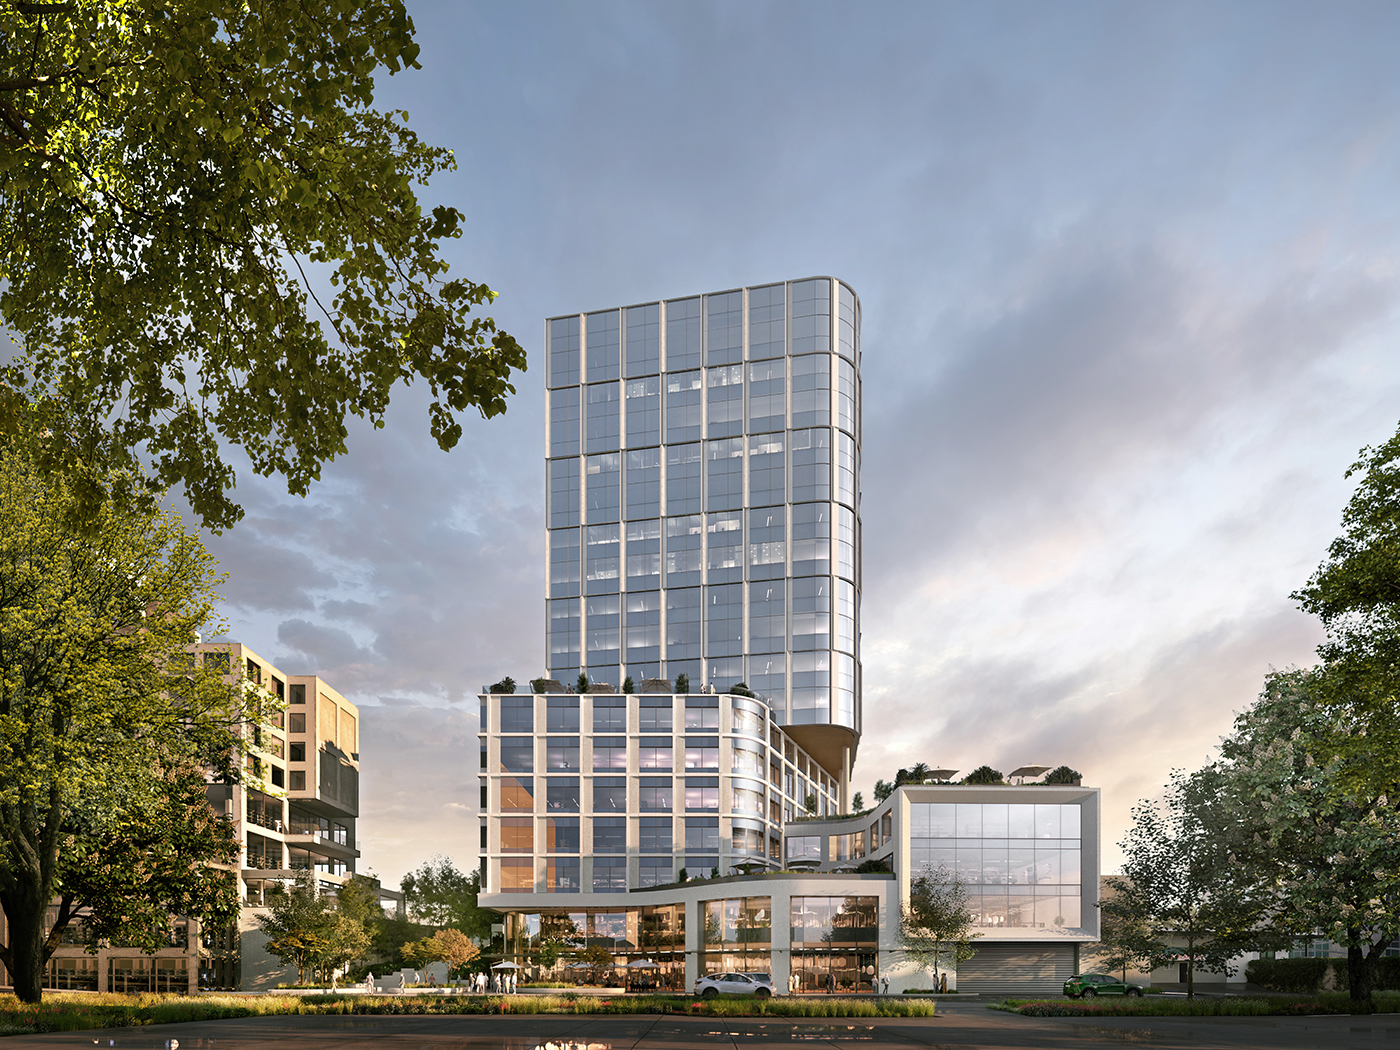 Schnitzer West Announces Plans for 19-Story Office Tower at Site of Old Rite Aid Location in Bellevue